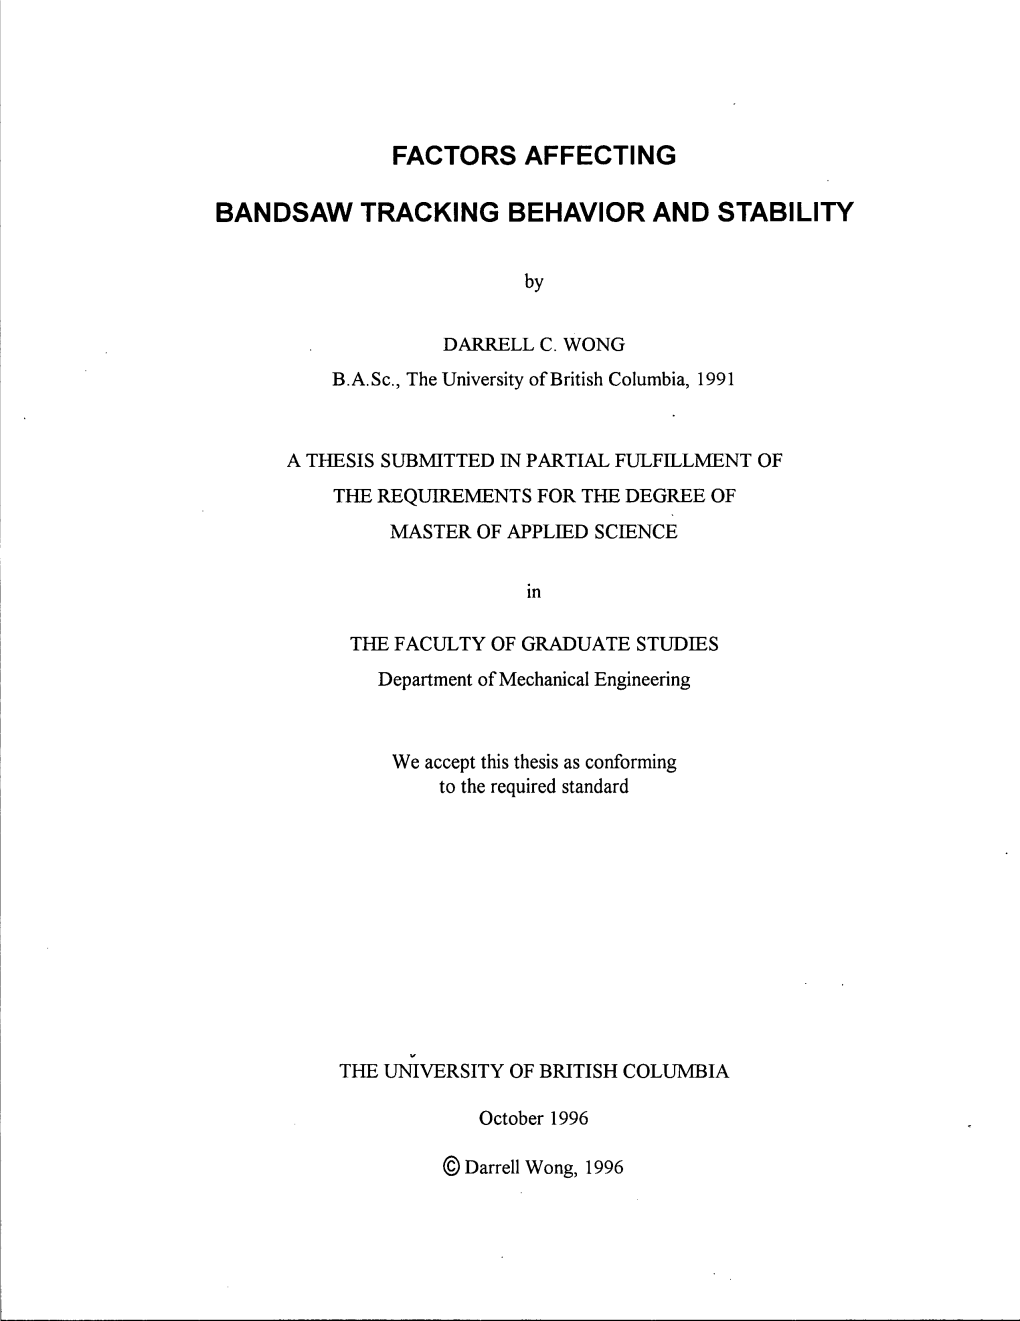 Factors Affecting Bandsaw Tracking Behavior And